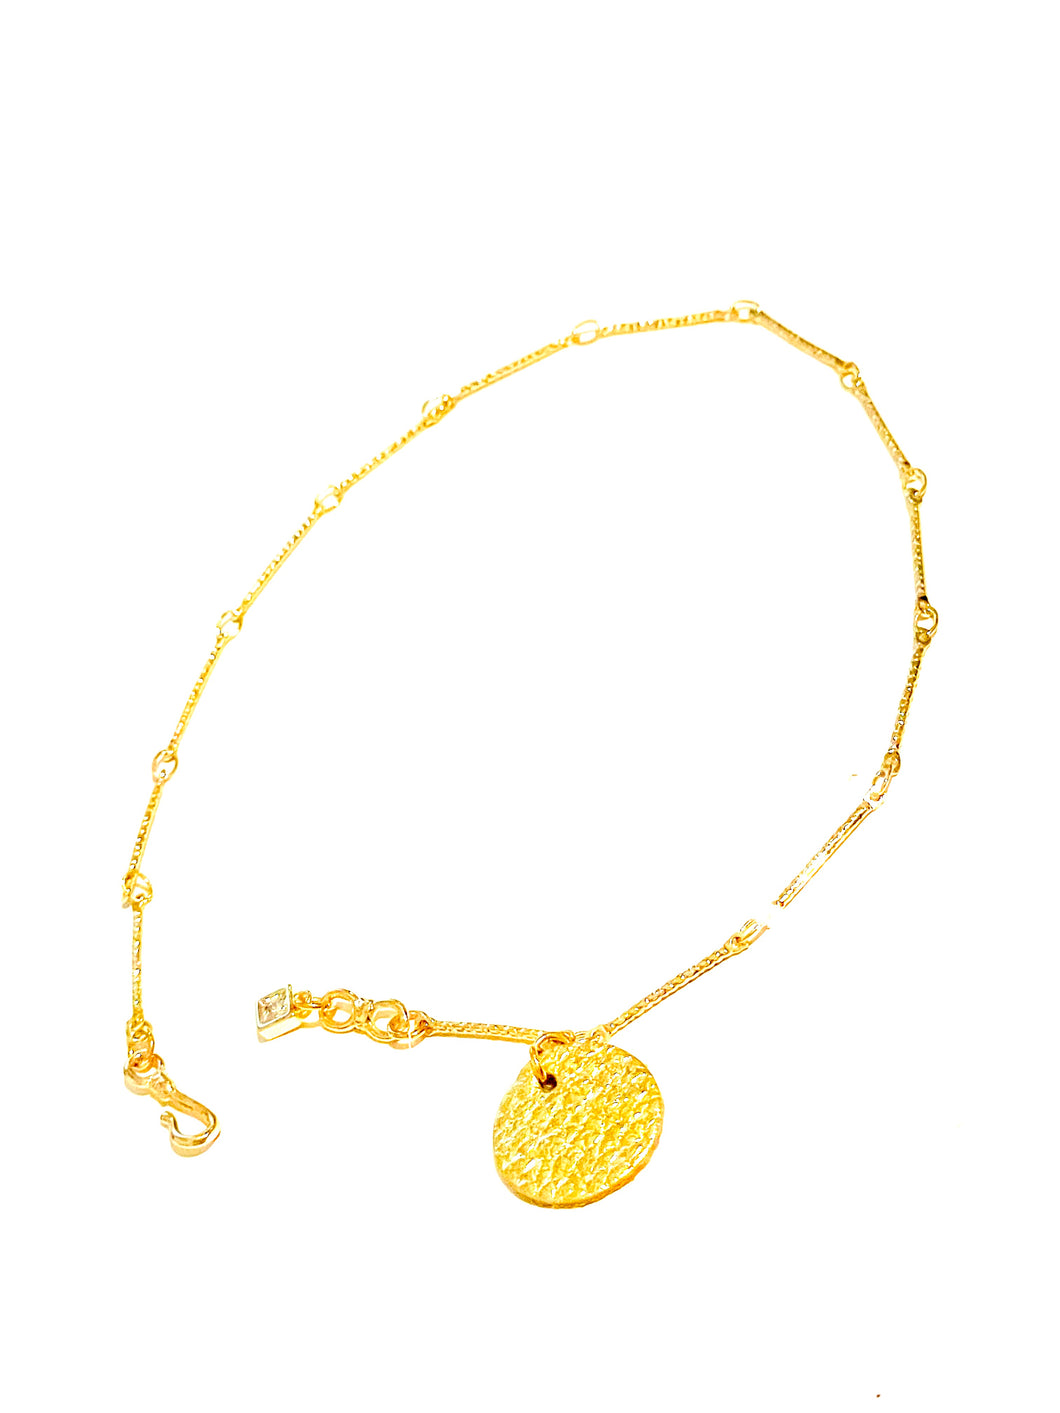 Anklet | Gold Link with Leather Charm